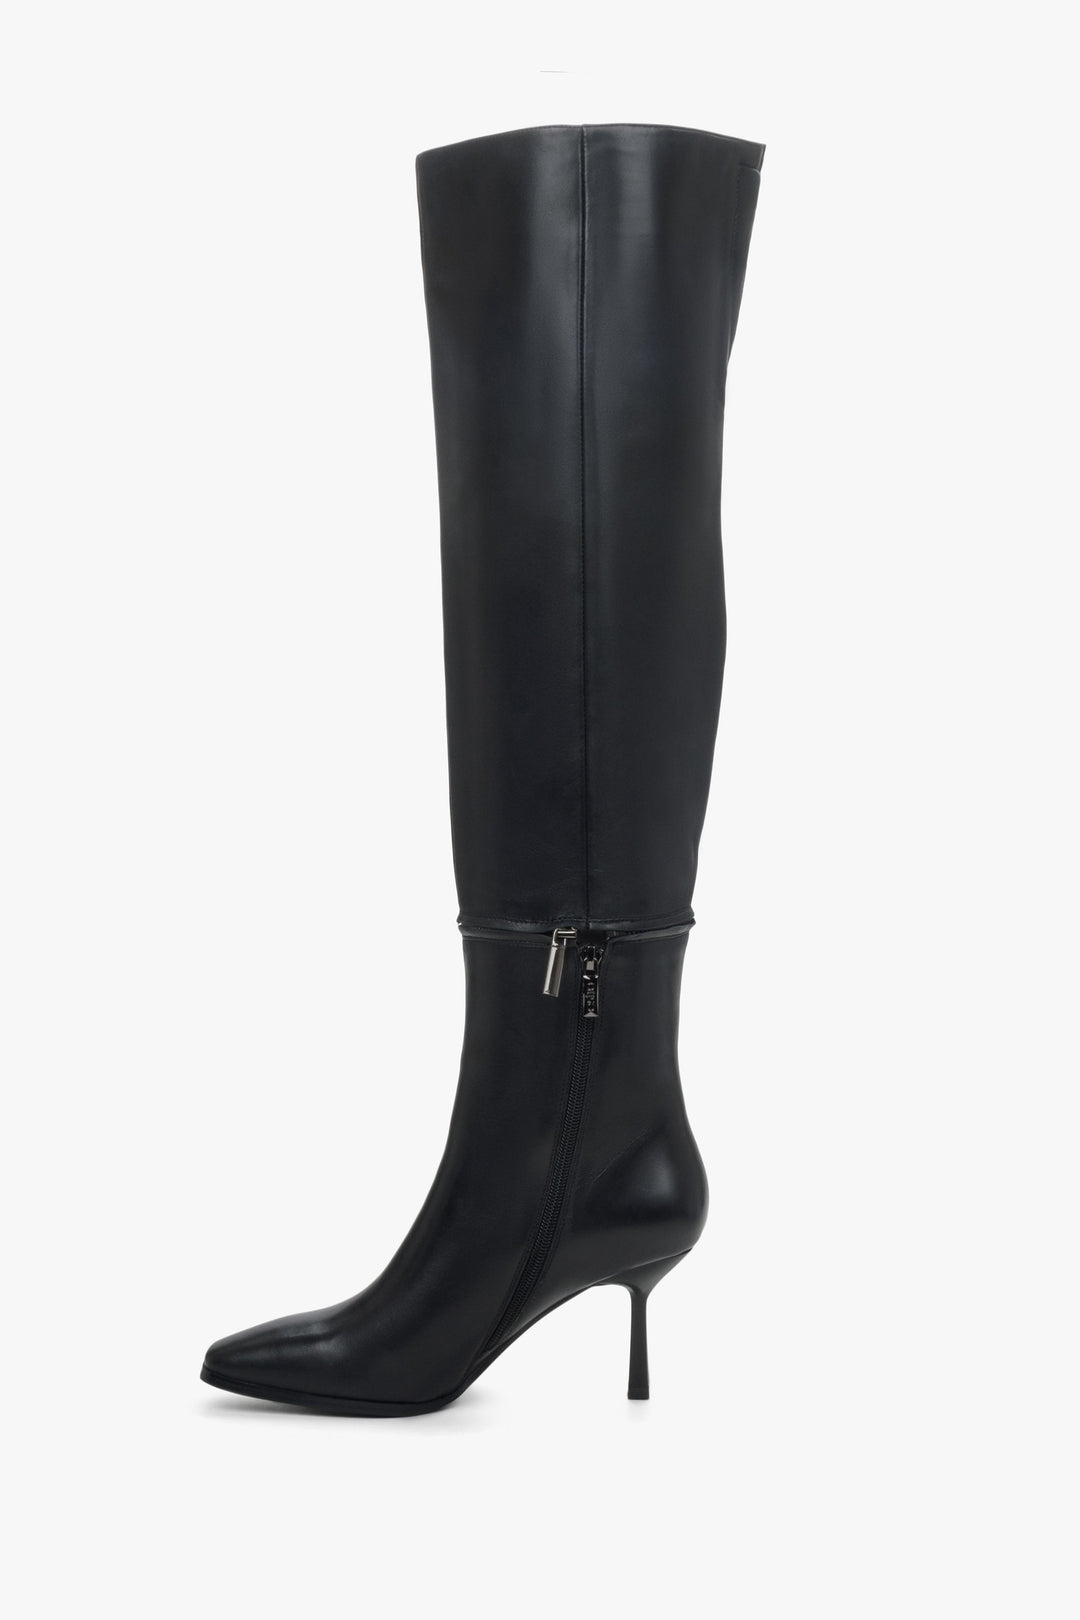 Women's black stretchy calf high-heel boots by Estro - shoe profile.